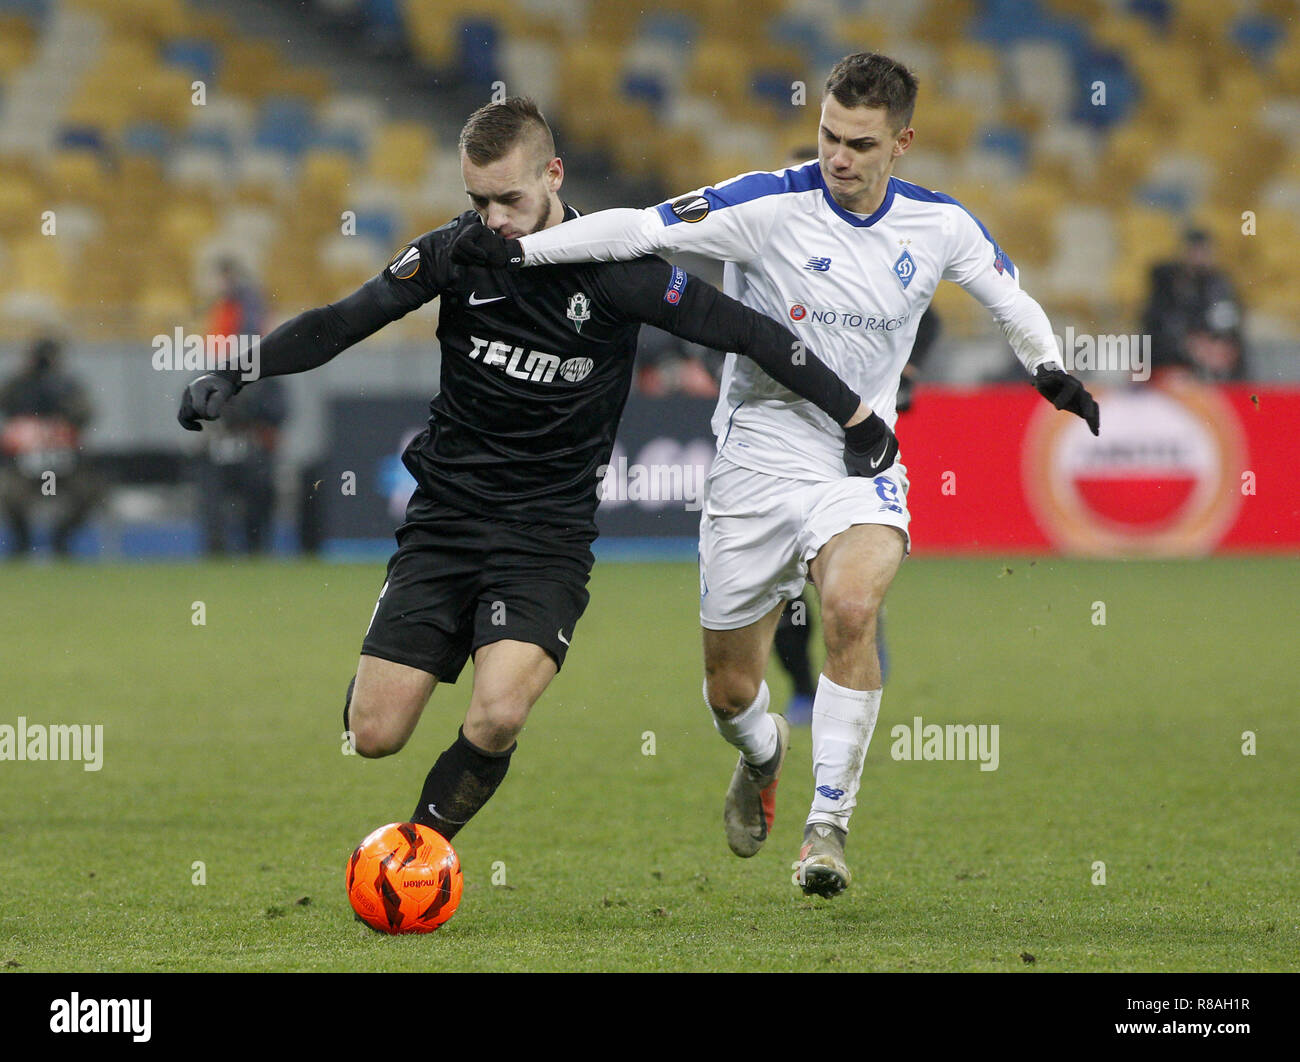 Kiev, Ukraine. 13th Dec, 2018. Milos KratochvÃ-l (L) of Jablonec and Volodymyr Shepeliev (R) of Dynamo are seen in action during the UEFA Europa League Group K soccer match between FC Dynamo Kiev and FK Jablonec at the NSK Olimpiyskiy in Kiev. Credit: Vadim Kot/SOPA Images/ZUMA Wire/Alamy Live News Stock Photo